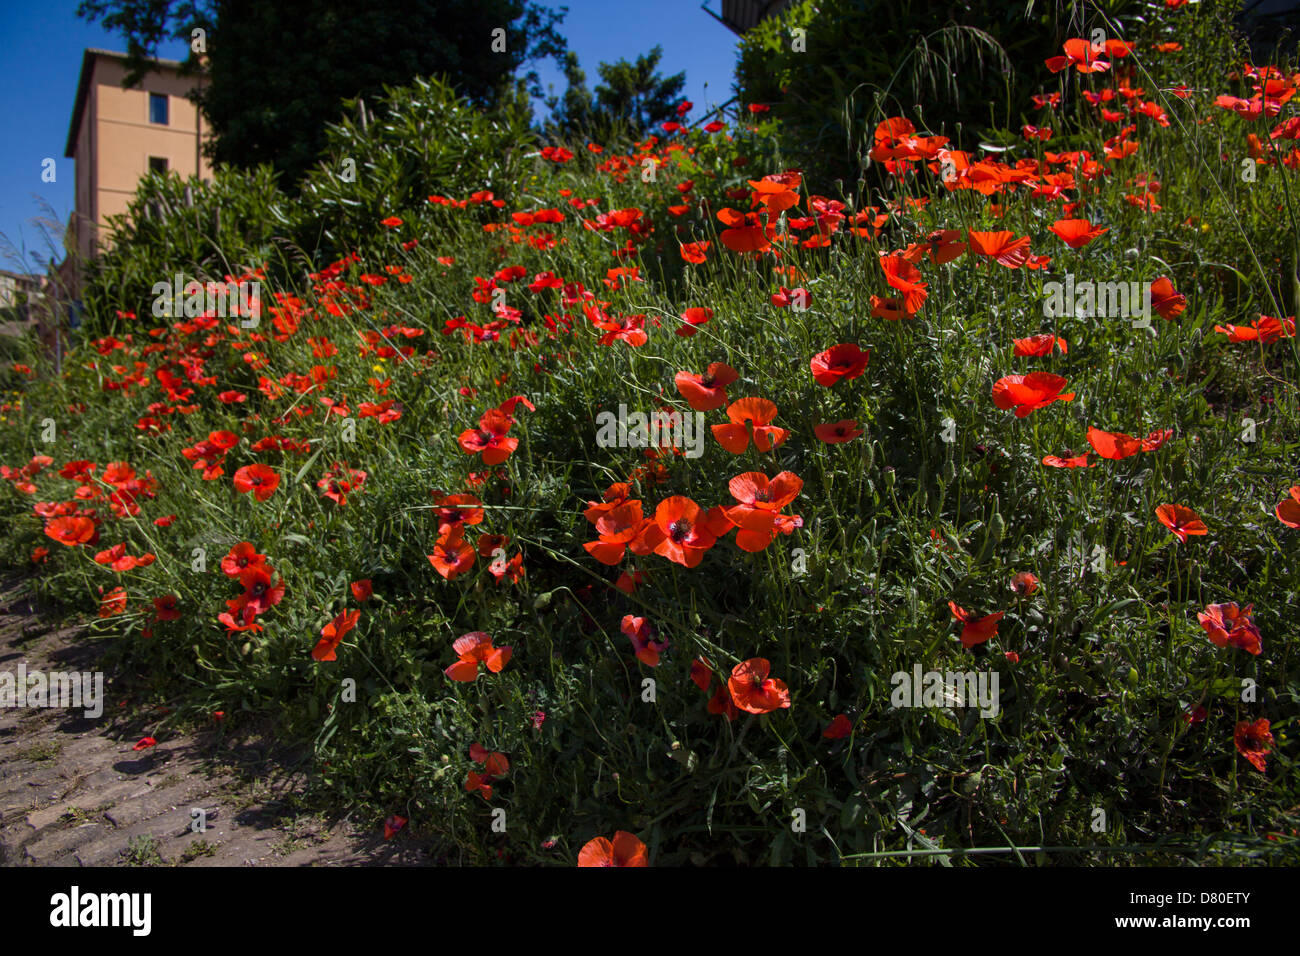 field of red poppies in the city, spring Stock Photo